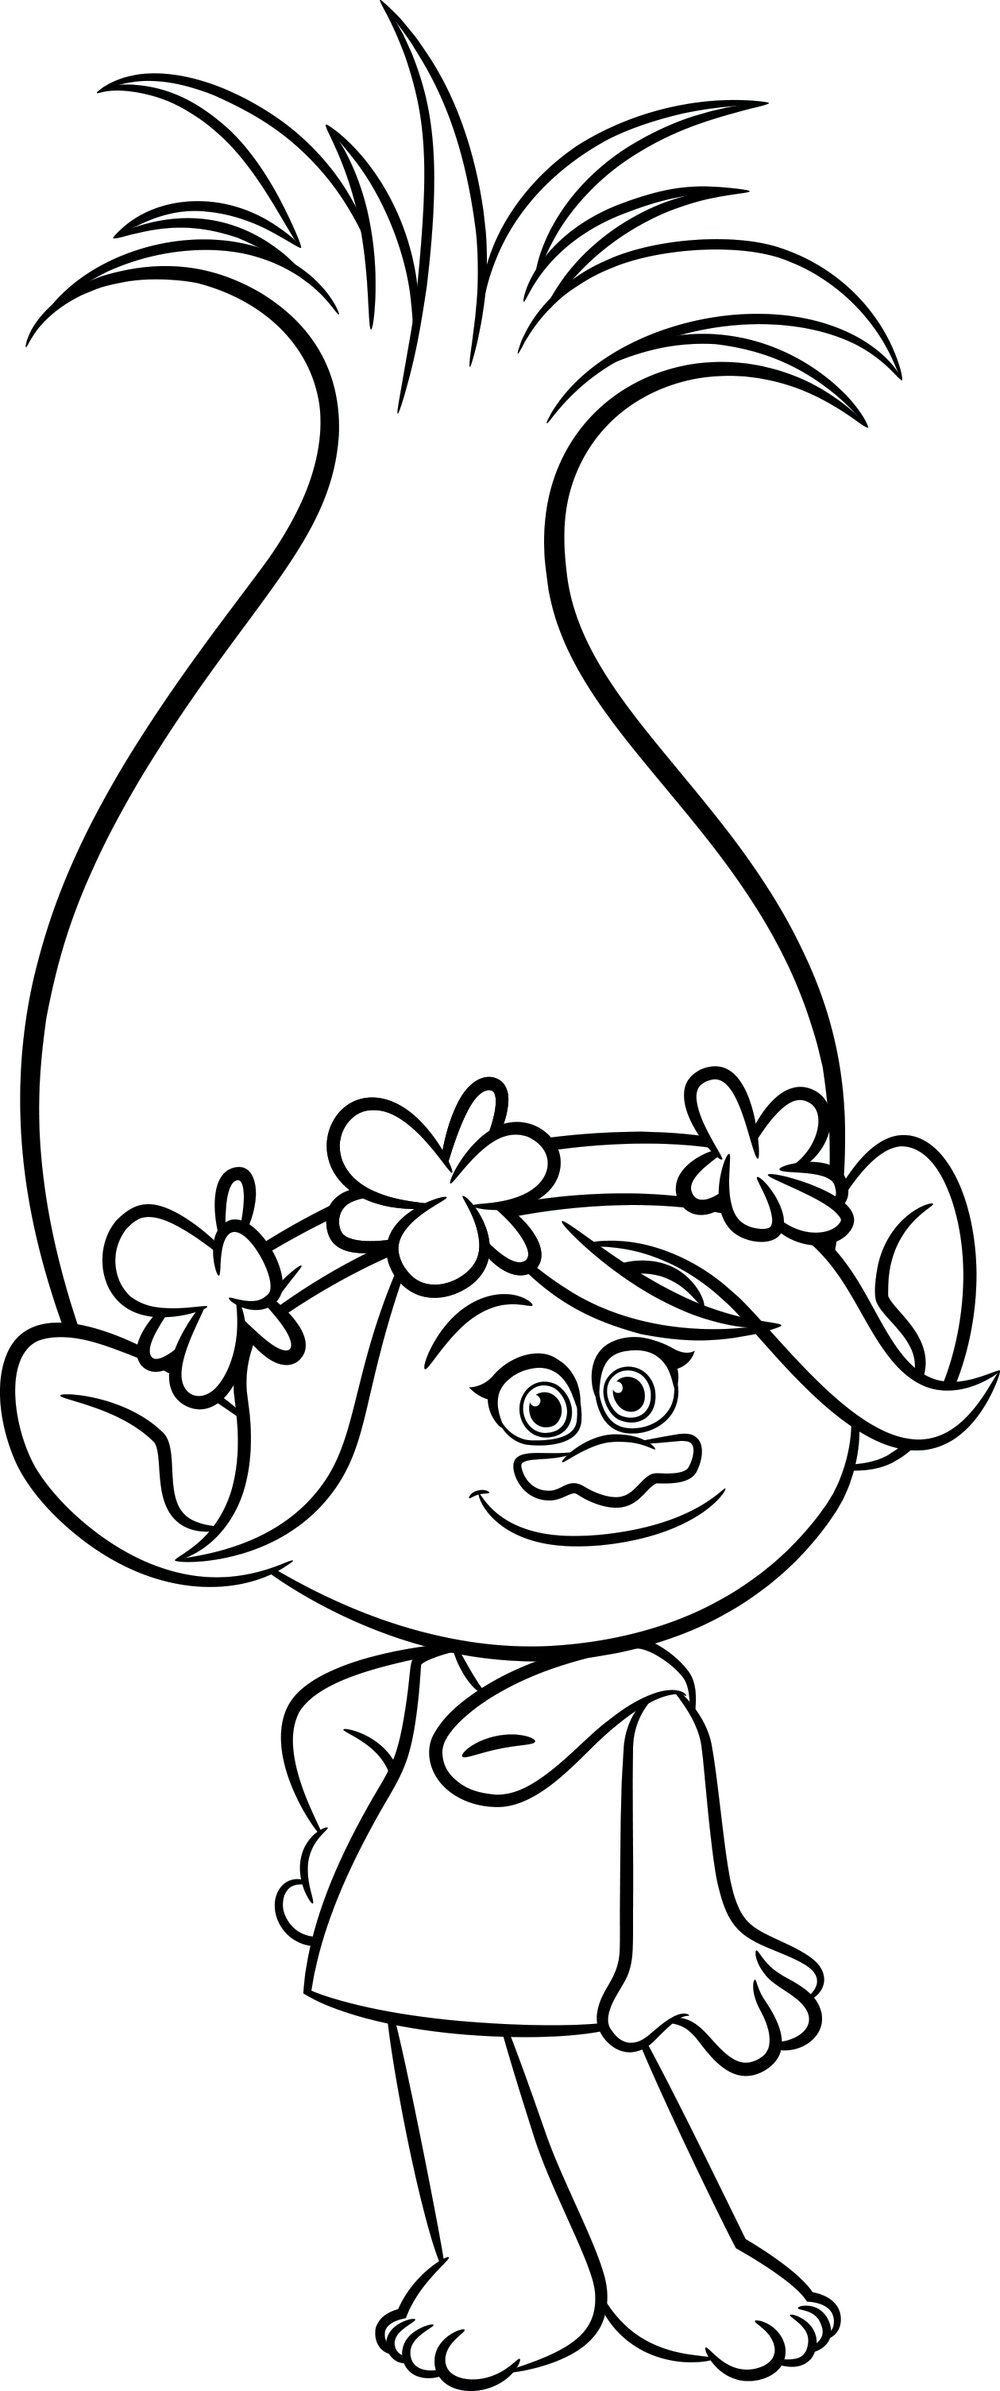 Coloring Pages For Kids Trolls
 Bring Home Happy with DreamWorks Trolls